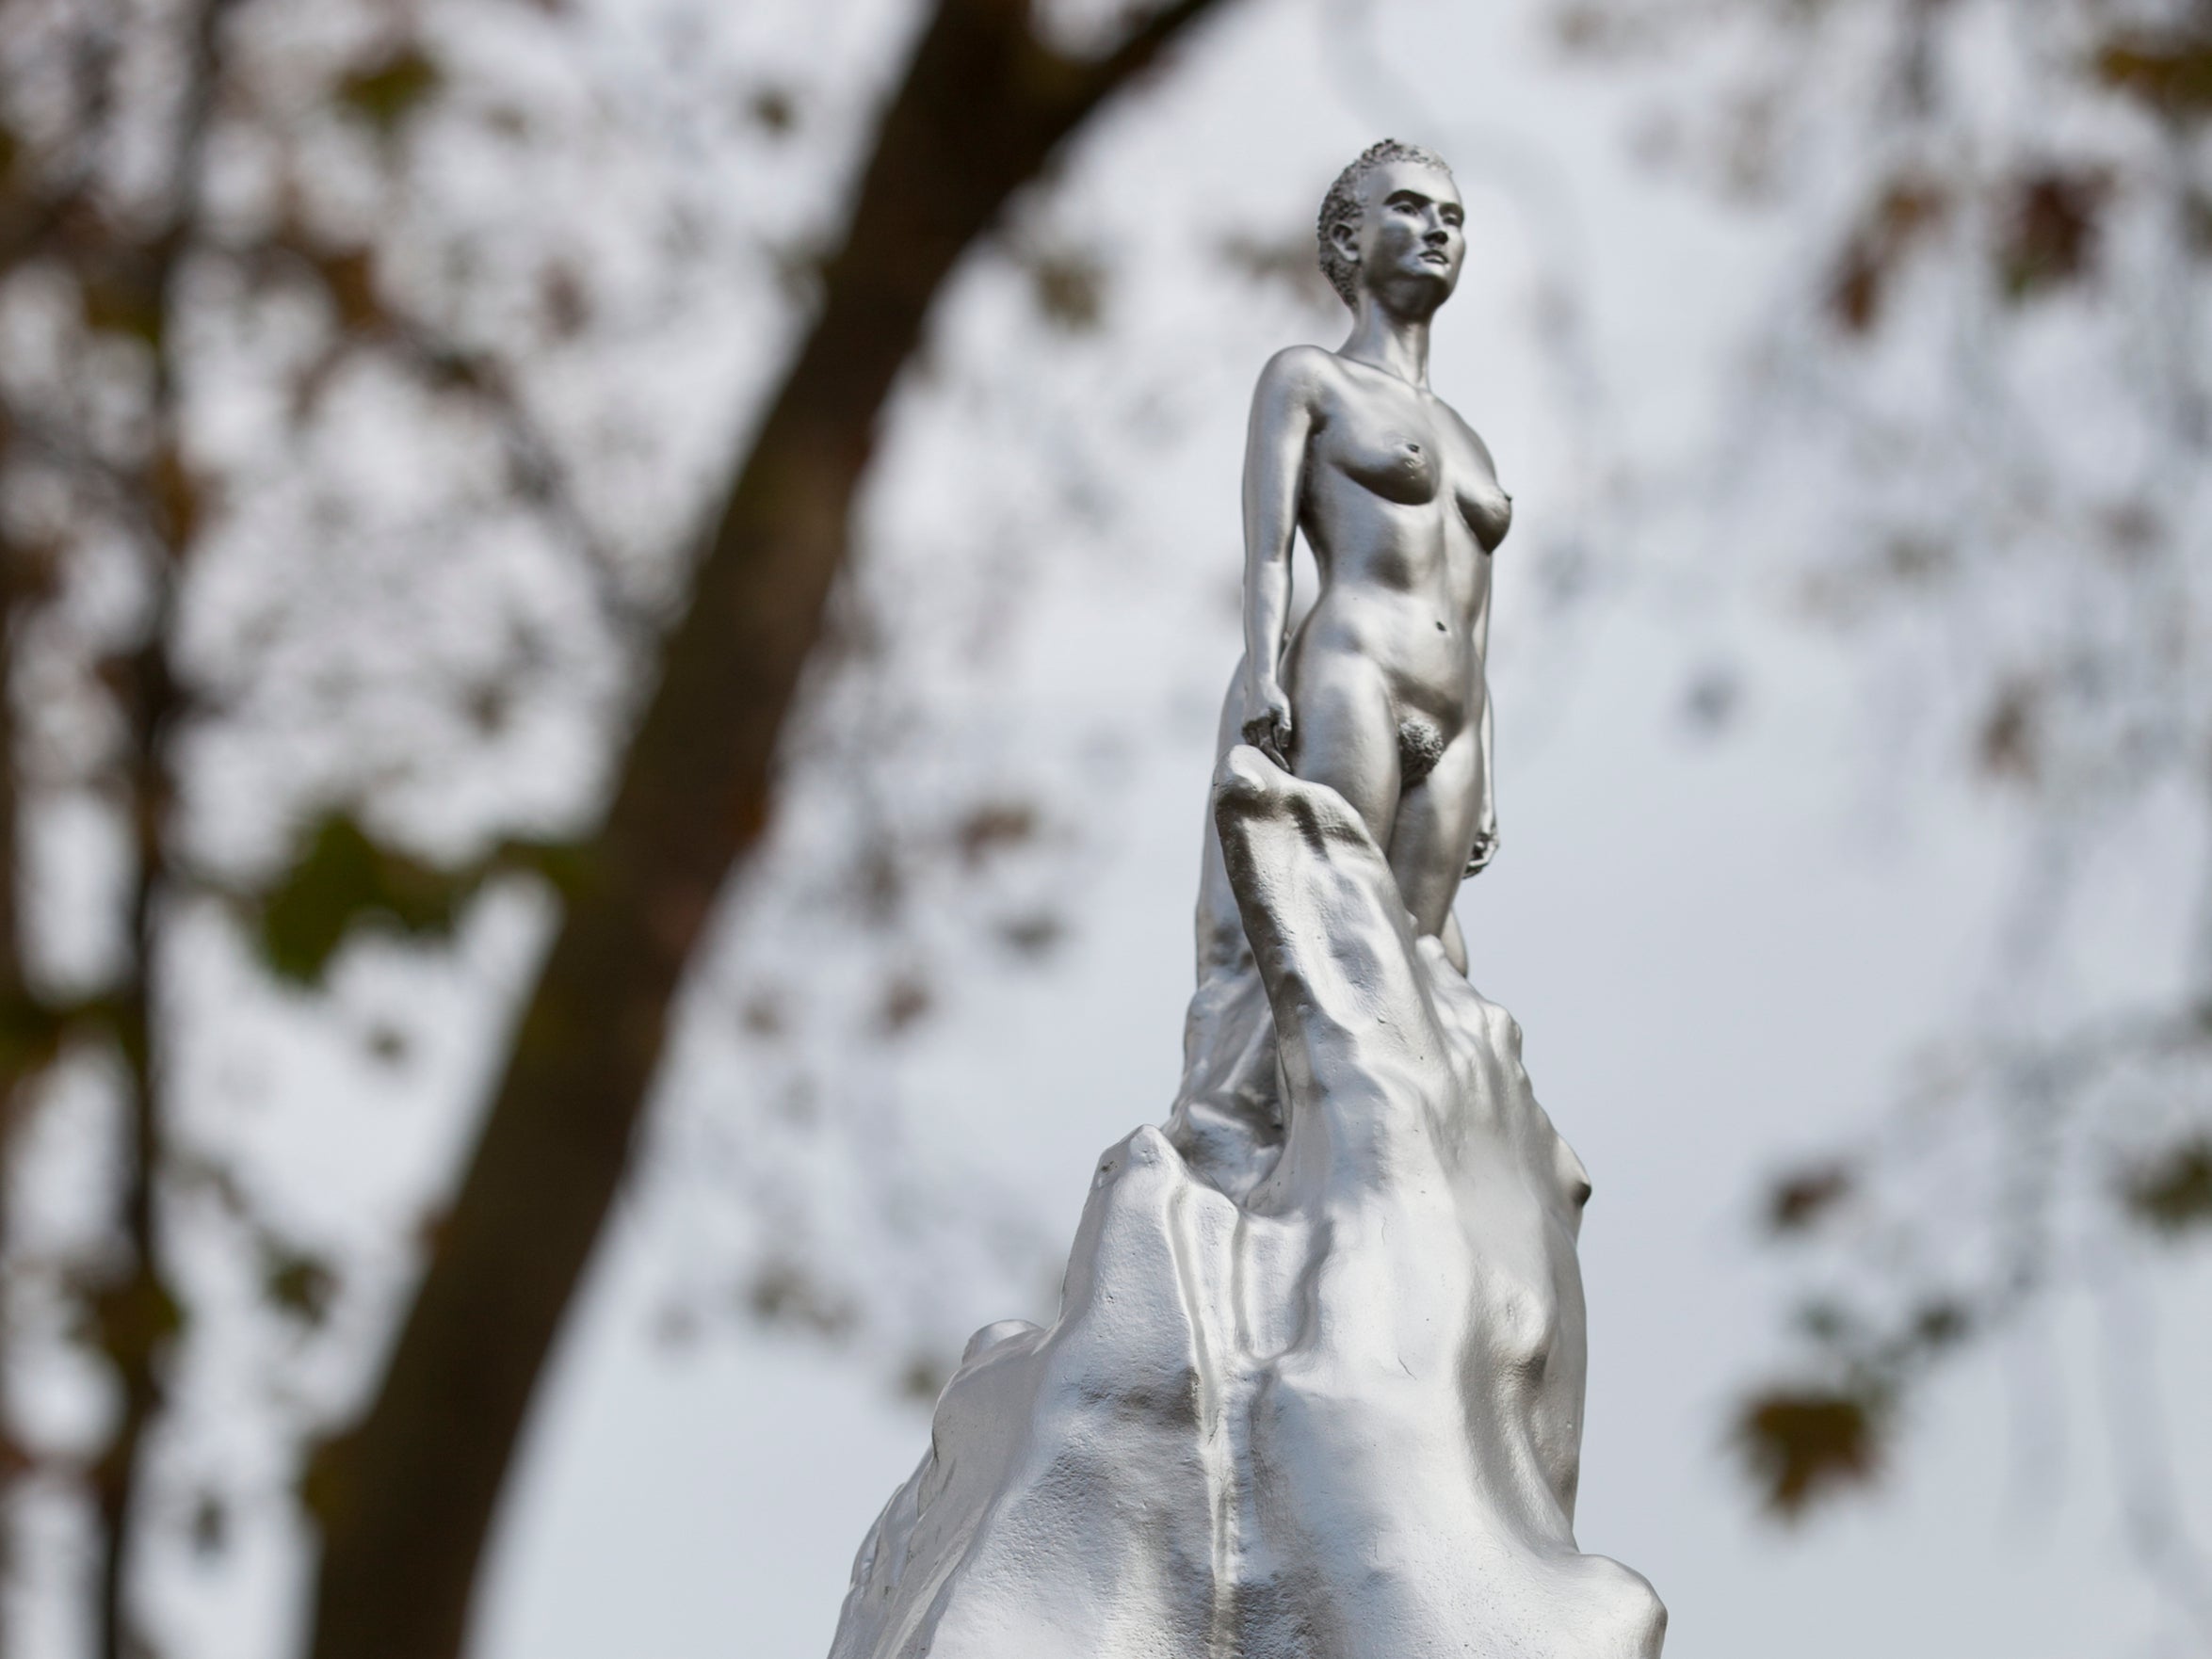 Maggi Hambling’s ‘A Sculpture for Mary Wollstonecraft’ unveiled on Newington Green, London